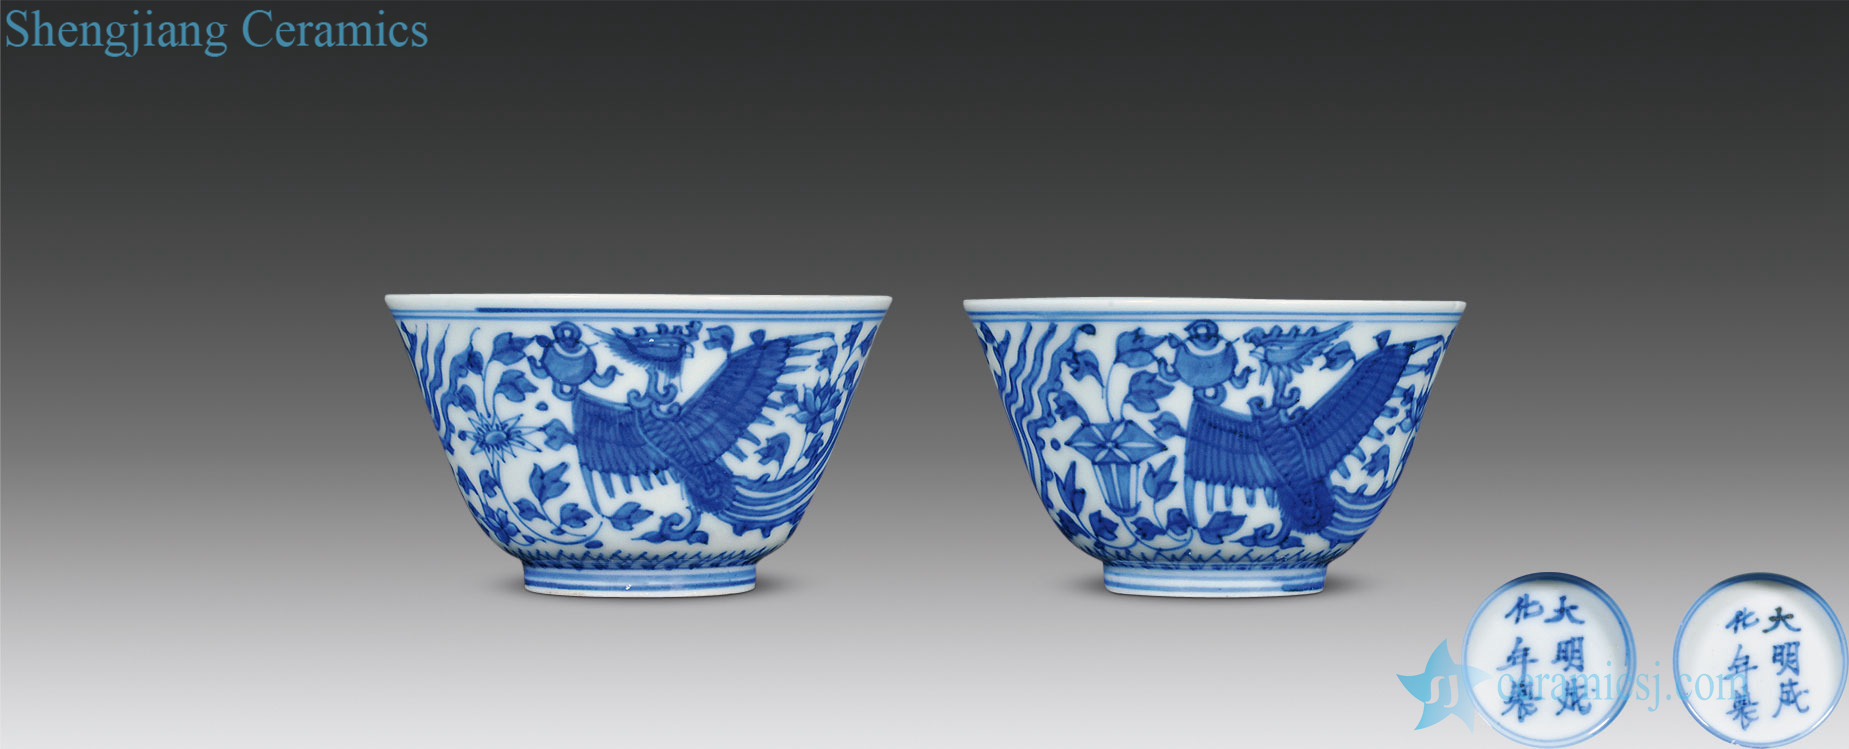 The qing emperor kangxi Blue and white floral grain cup (a)